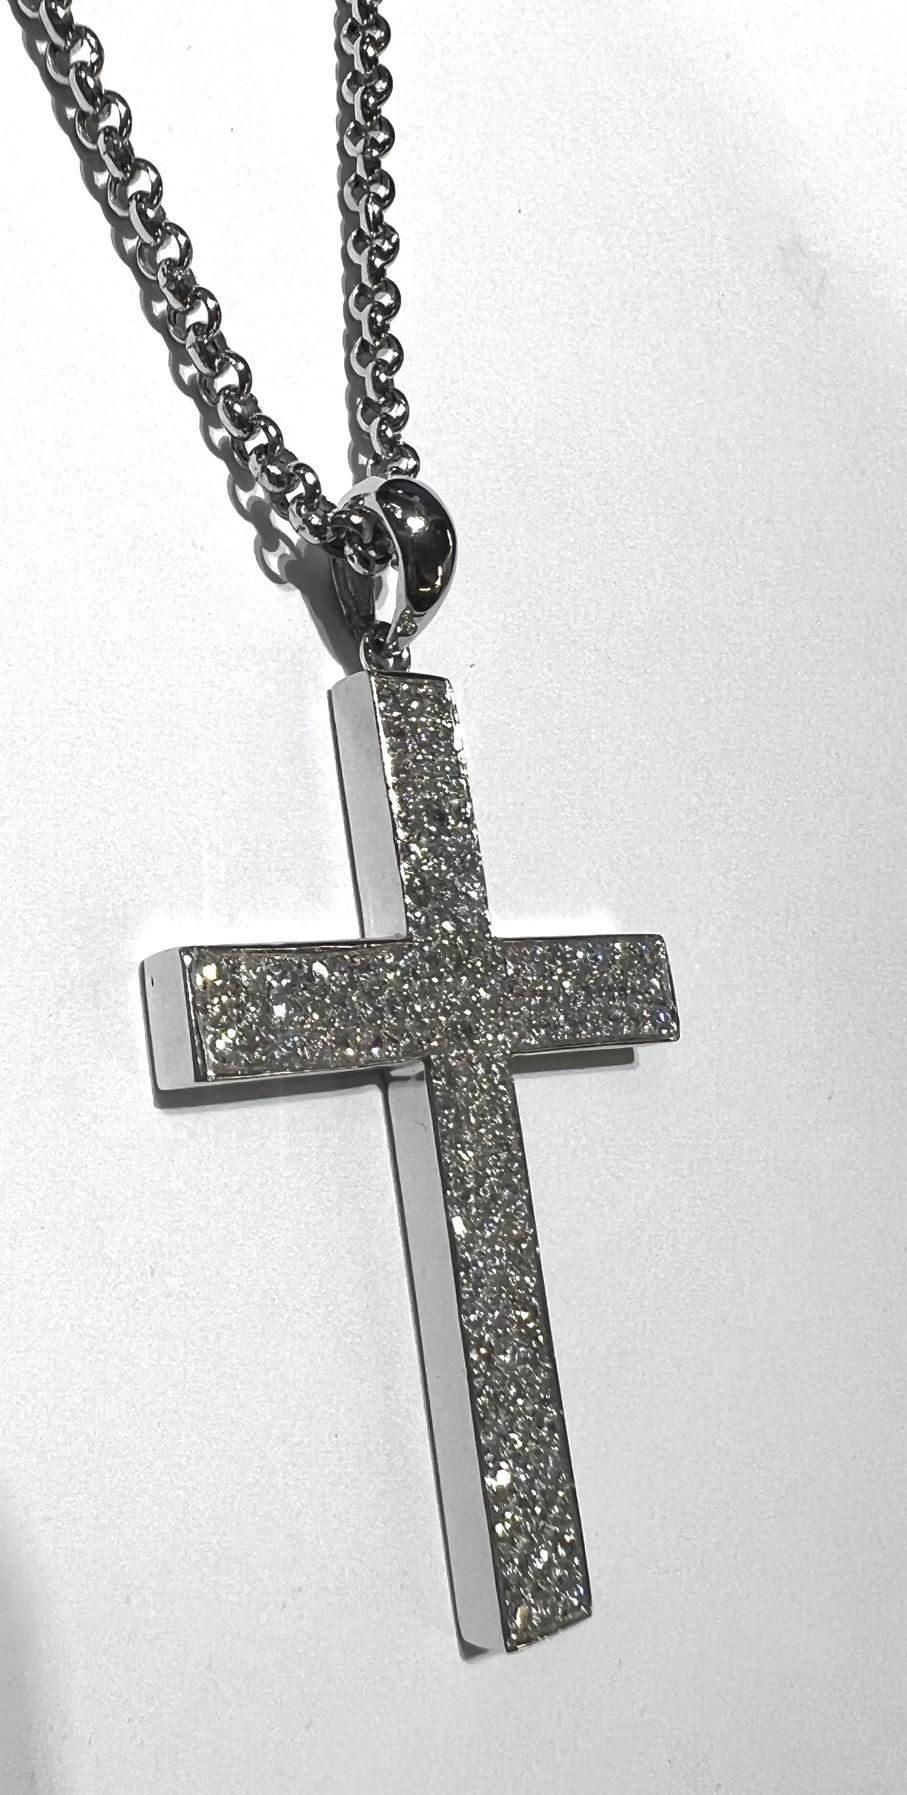 2.80 Carat Diamond Cross Necklace 

Stones: 114 Diamond
Stone Shape: Round 
Stone Carat: 2.80 Carat 
Stone Color: G-I
Stone Clarity: SI Clarity
Material: 14K White Gold 
Chain: Round Link 20 Inch Chain with Lobster Clasp
Chain: 3MM 

Pendant